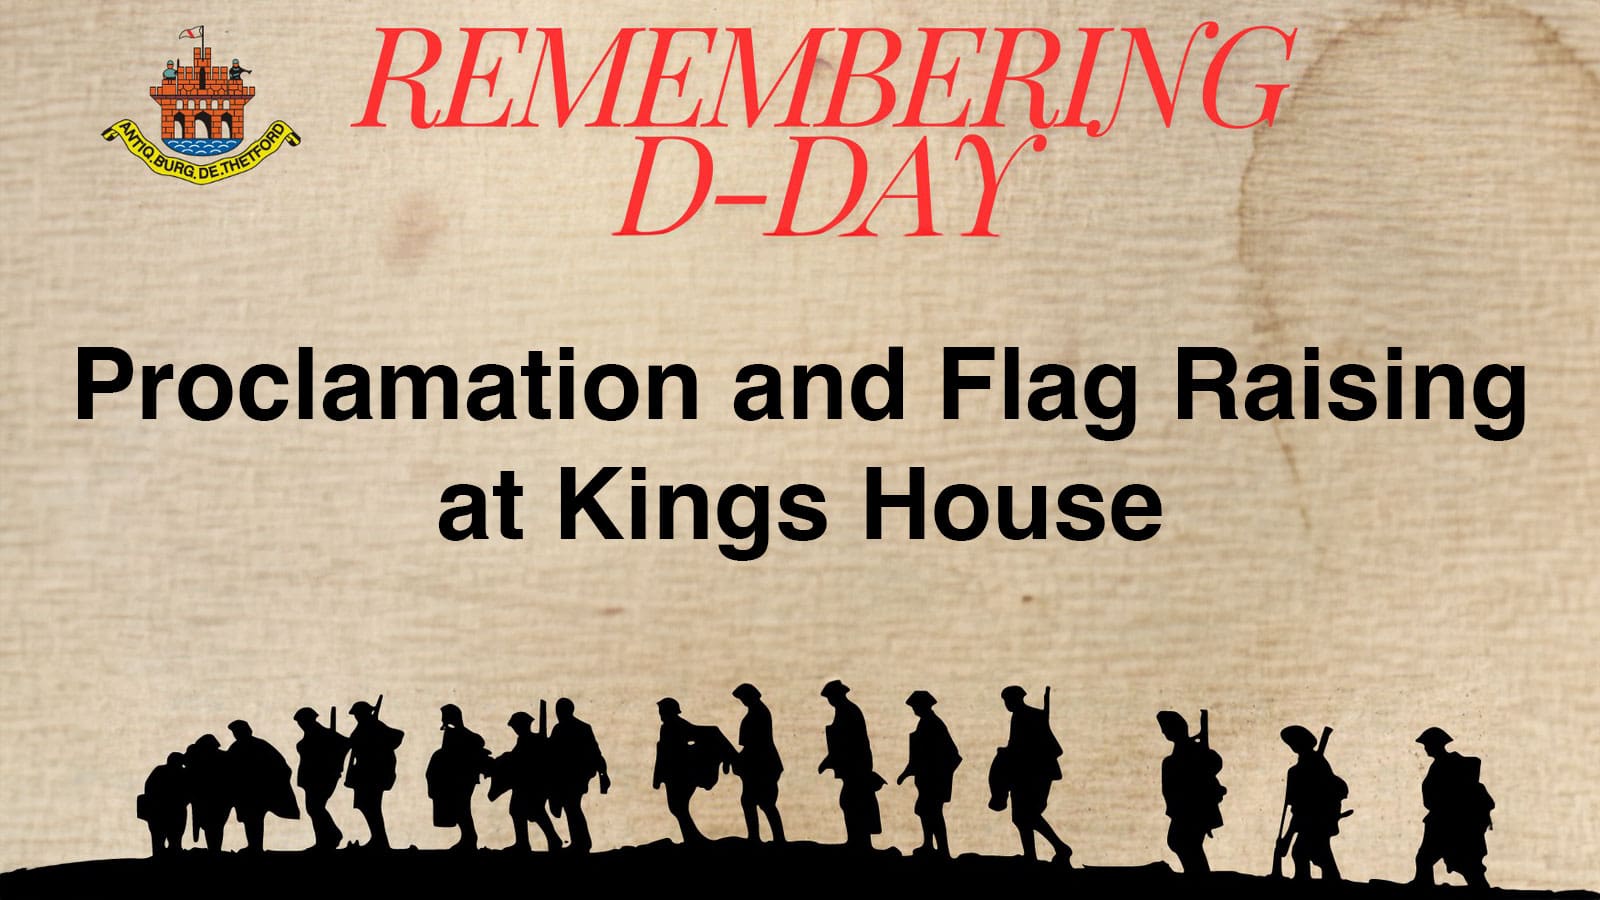 Thetford Bubbly Hub what's on and events D-Day Proclamation Flag Raising Kings House